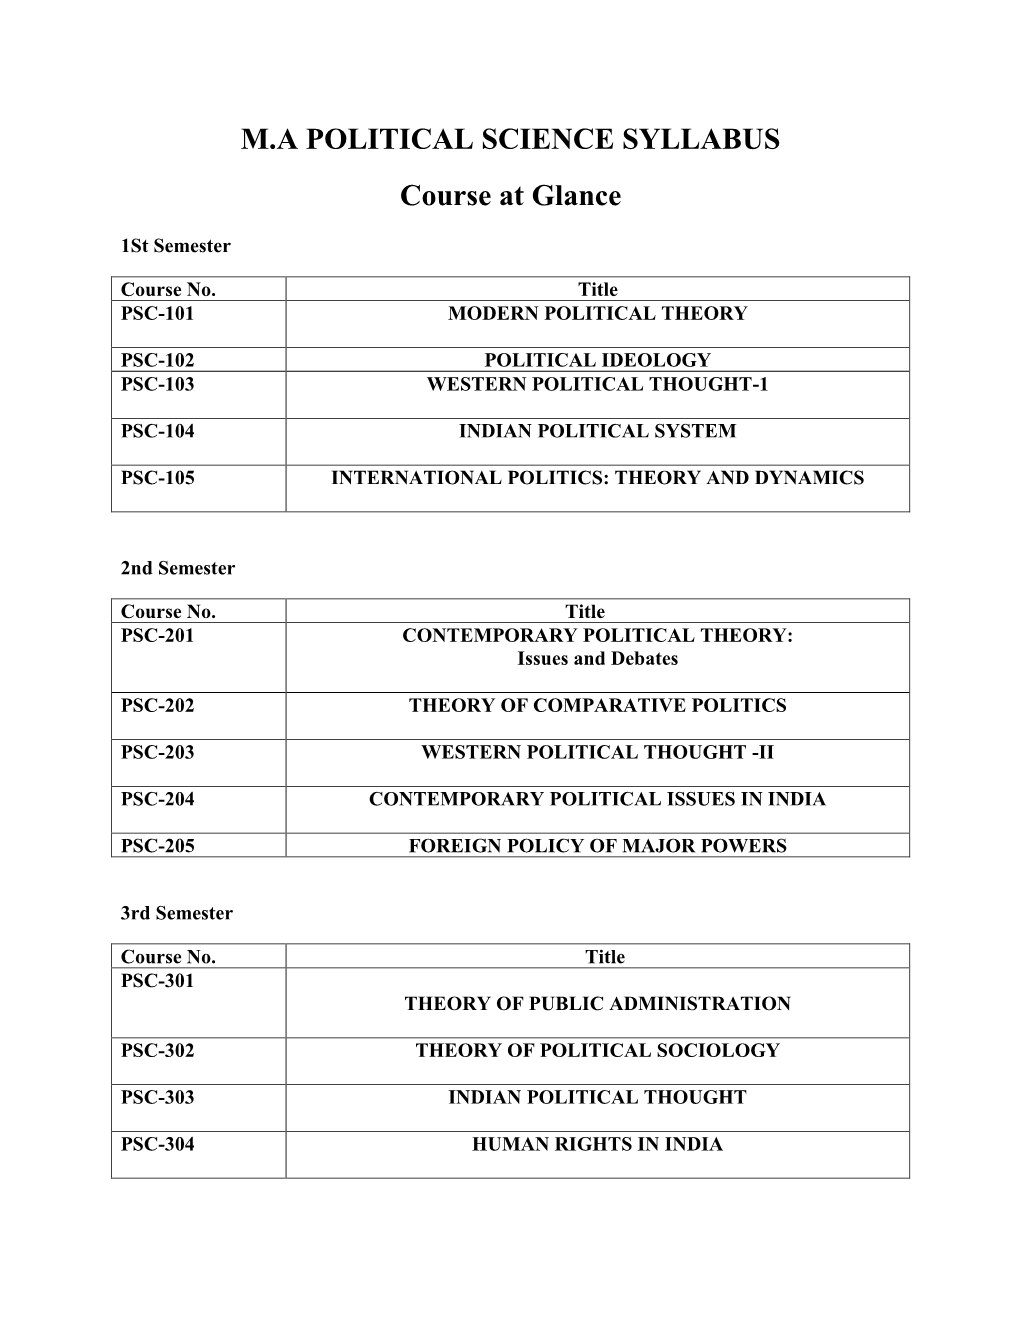 M.A POLITICAL SCIENCE SYLLABUS Course at Glance